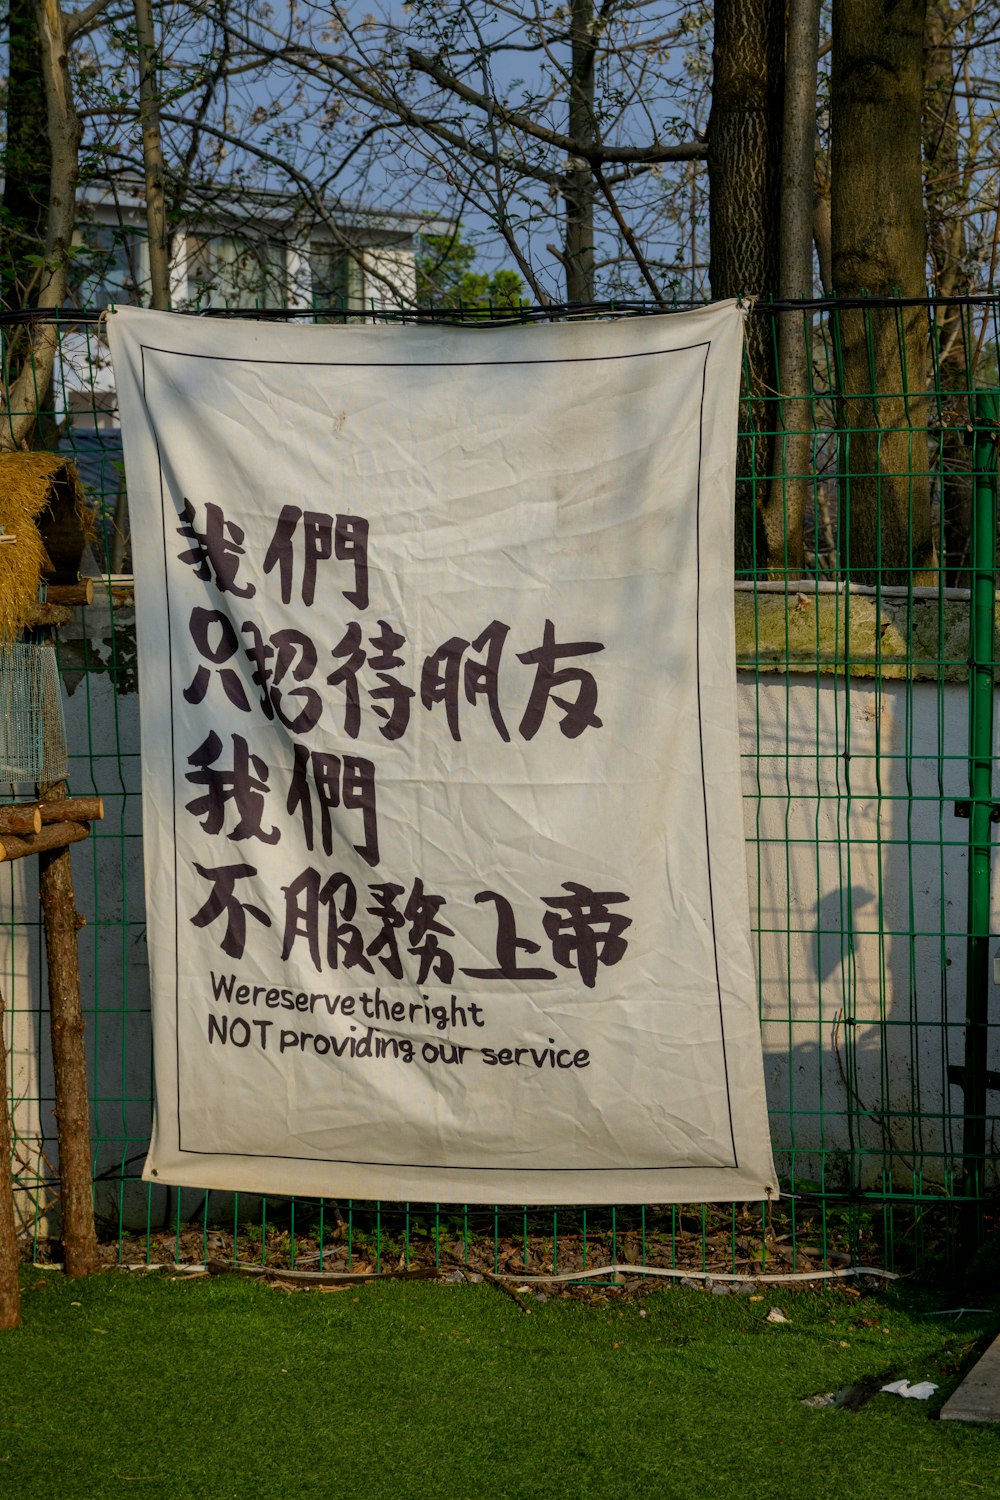 a sign on a fence in a foreign language